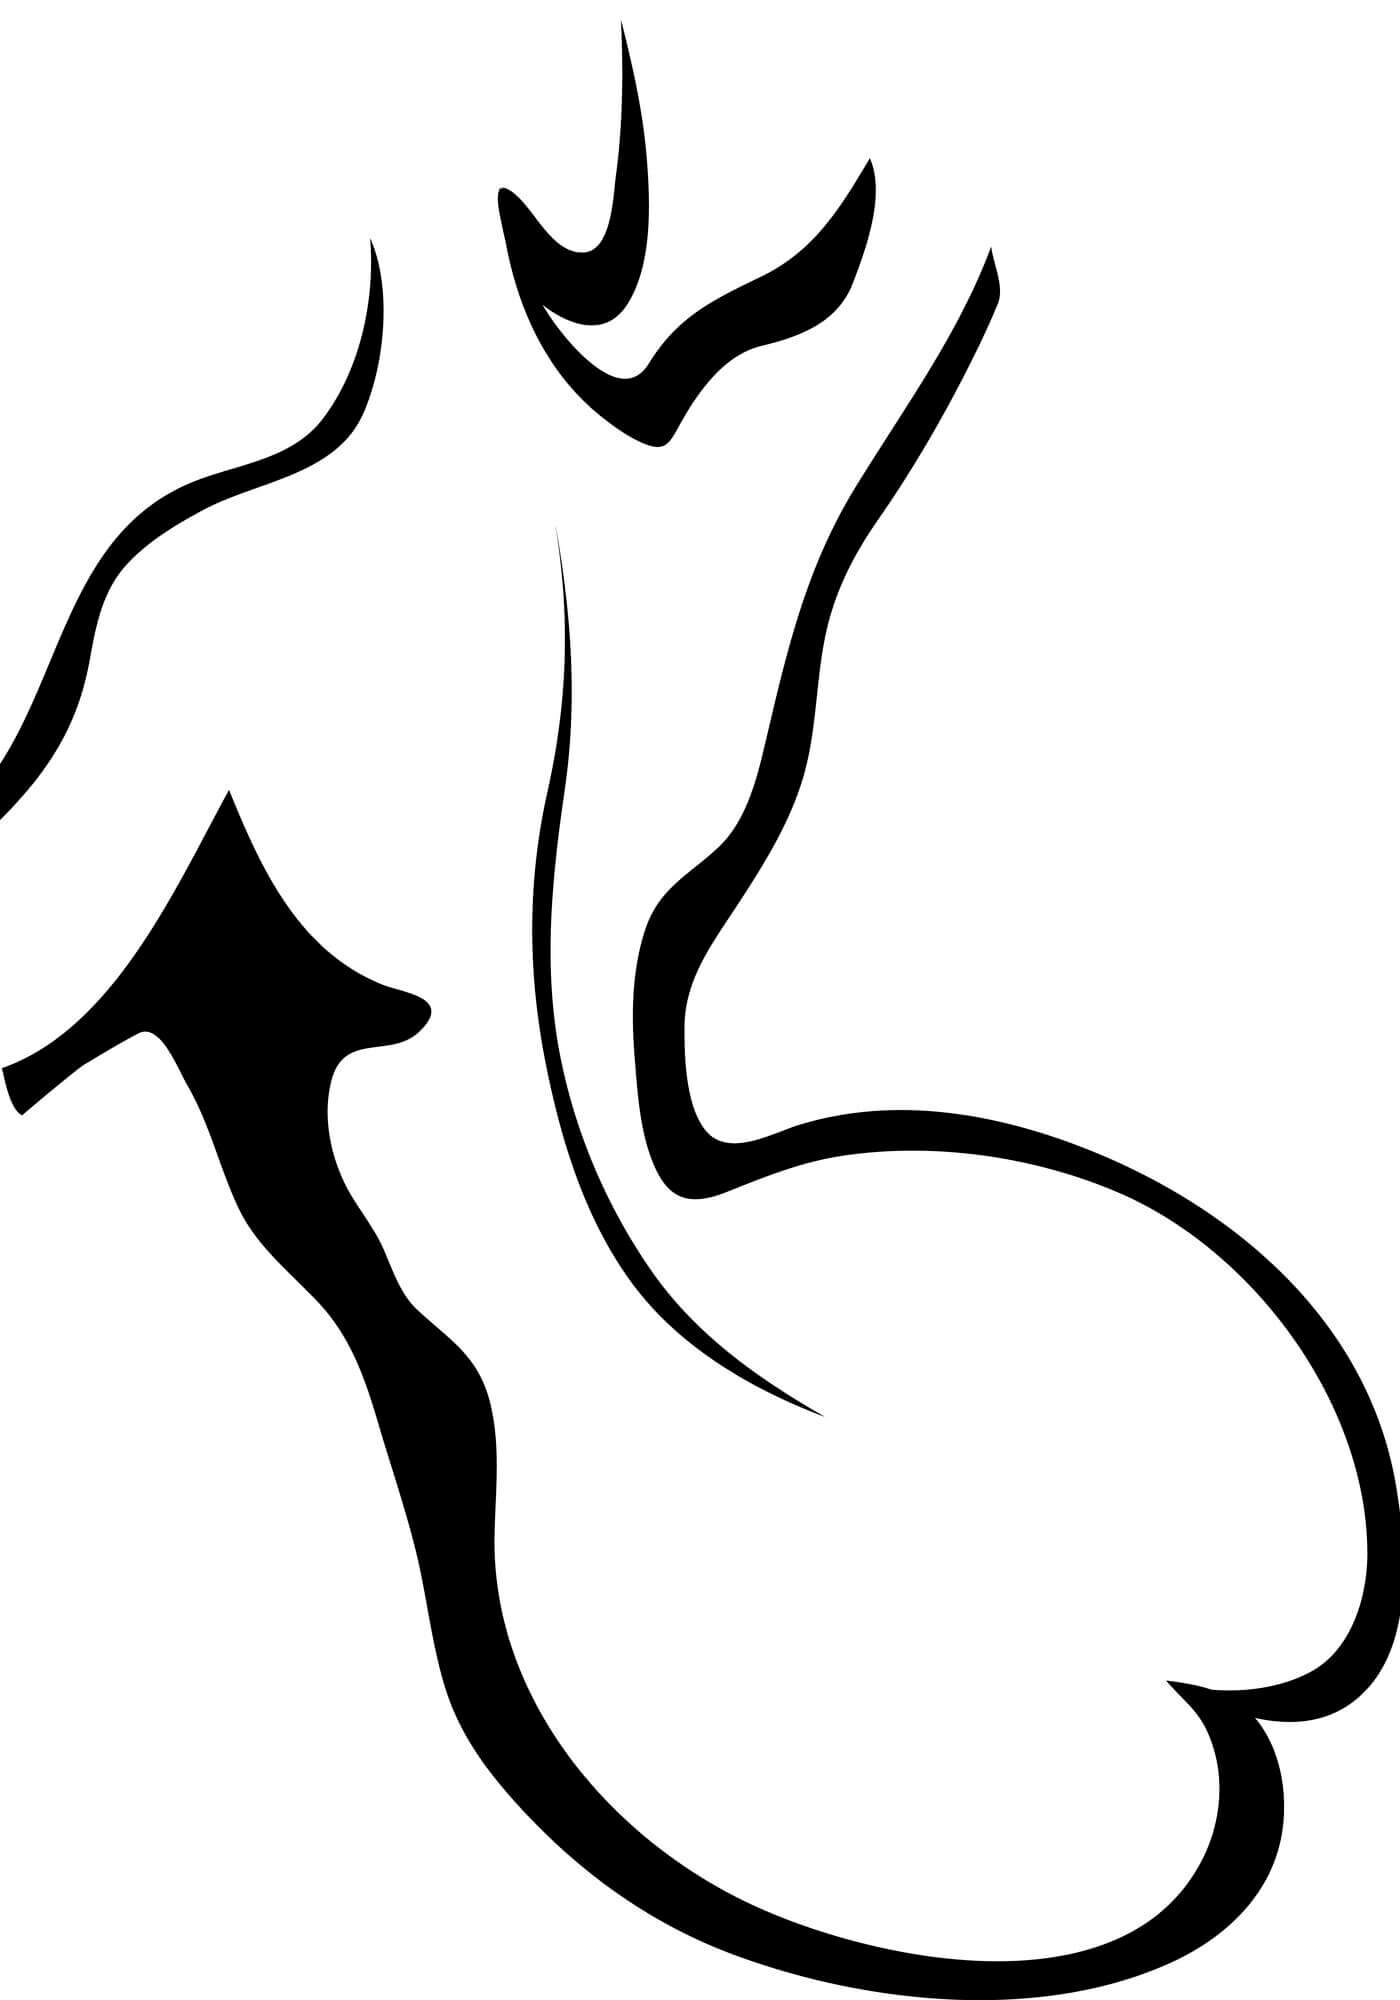 A black and white silhouette of a woman's body.